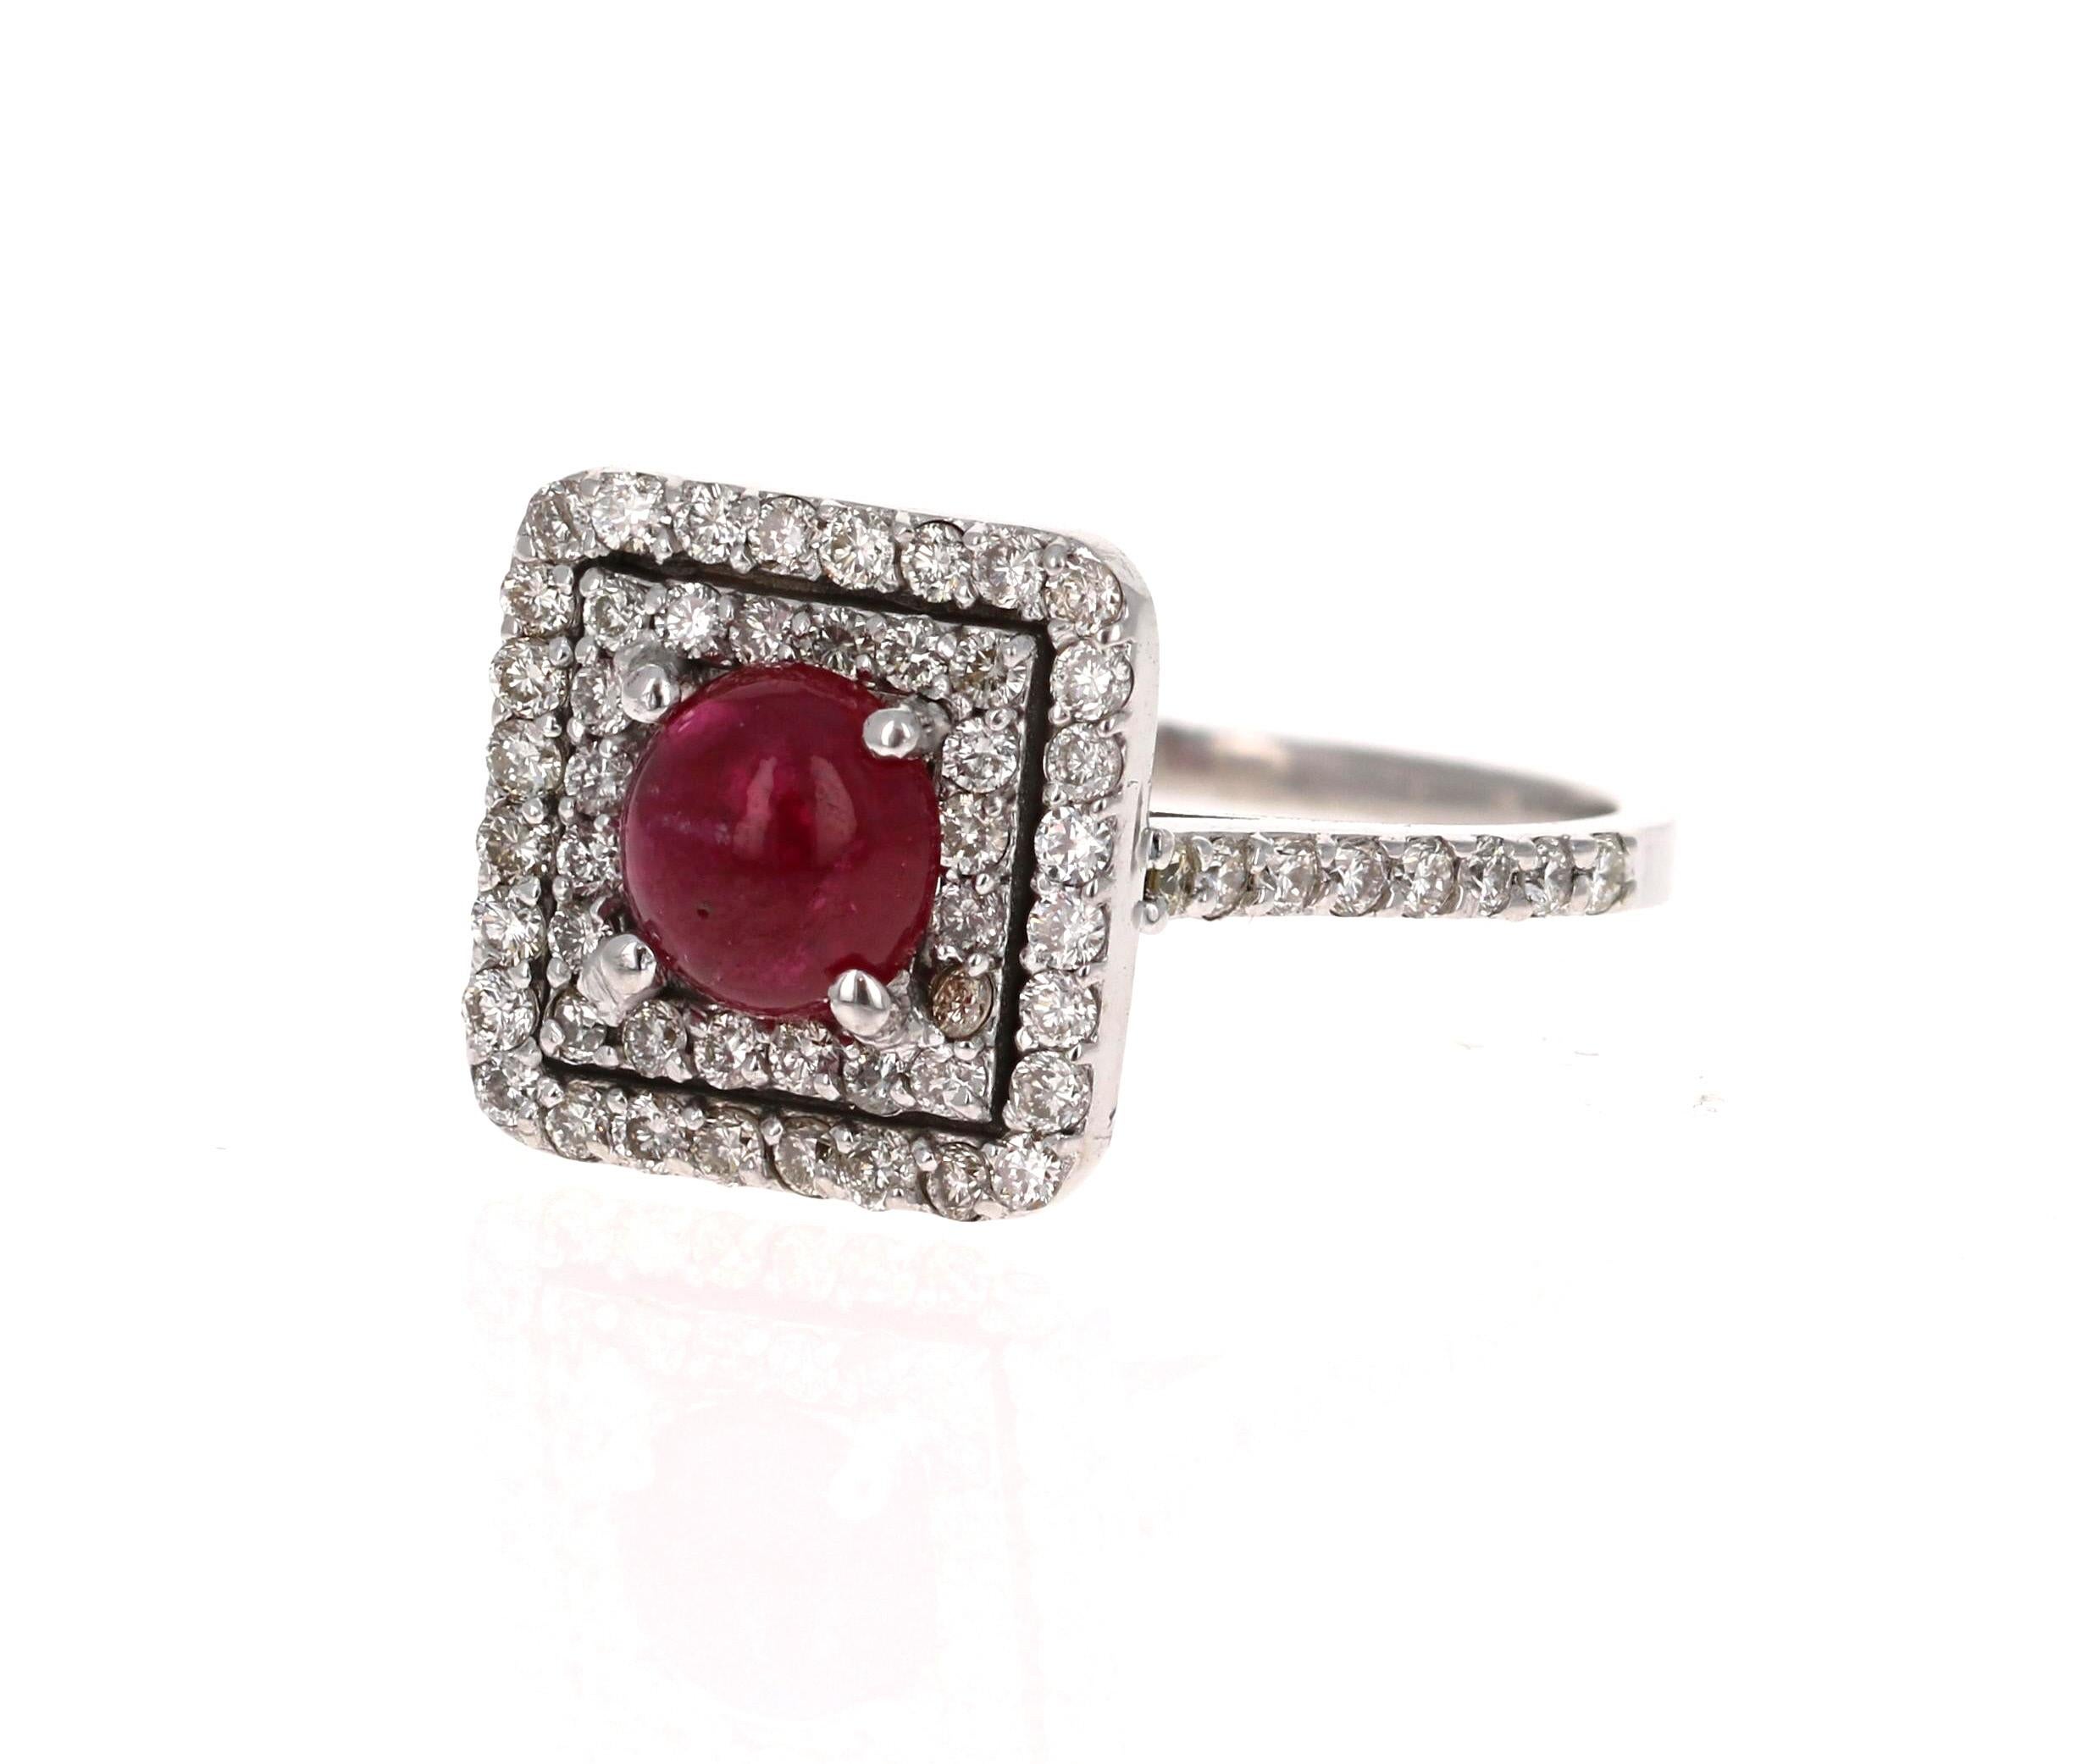 A cute and elegant Ruby Ring that can be a promise or engagement ring!
2.00 Carat Ruby Diamond White Gold 14 Karat Halo Ring

A Round Cut Ruby Cabochon weighing 1.22 Carats is surrounded by a double halo of 64 Round Cut Diamonds that weigh 0.78